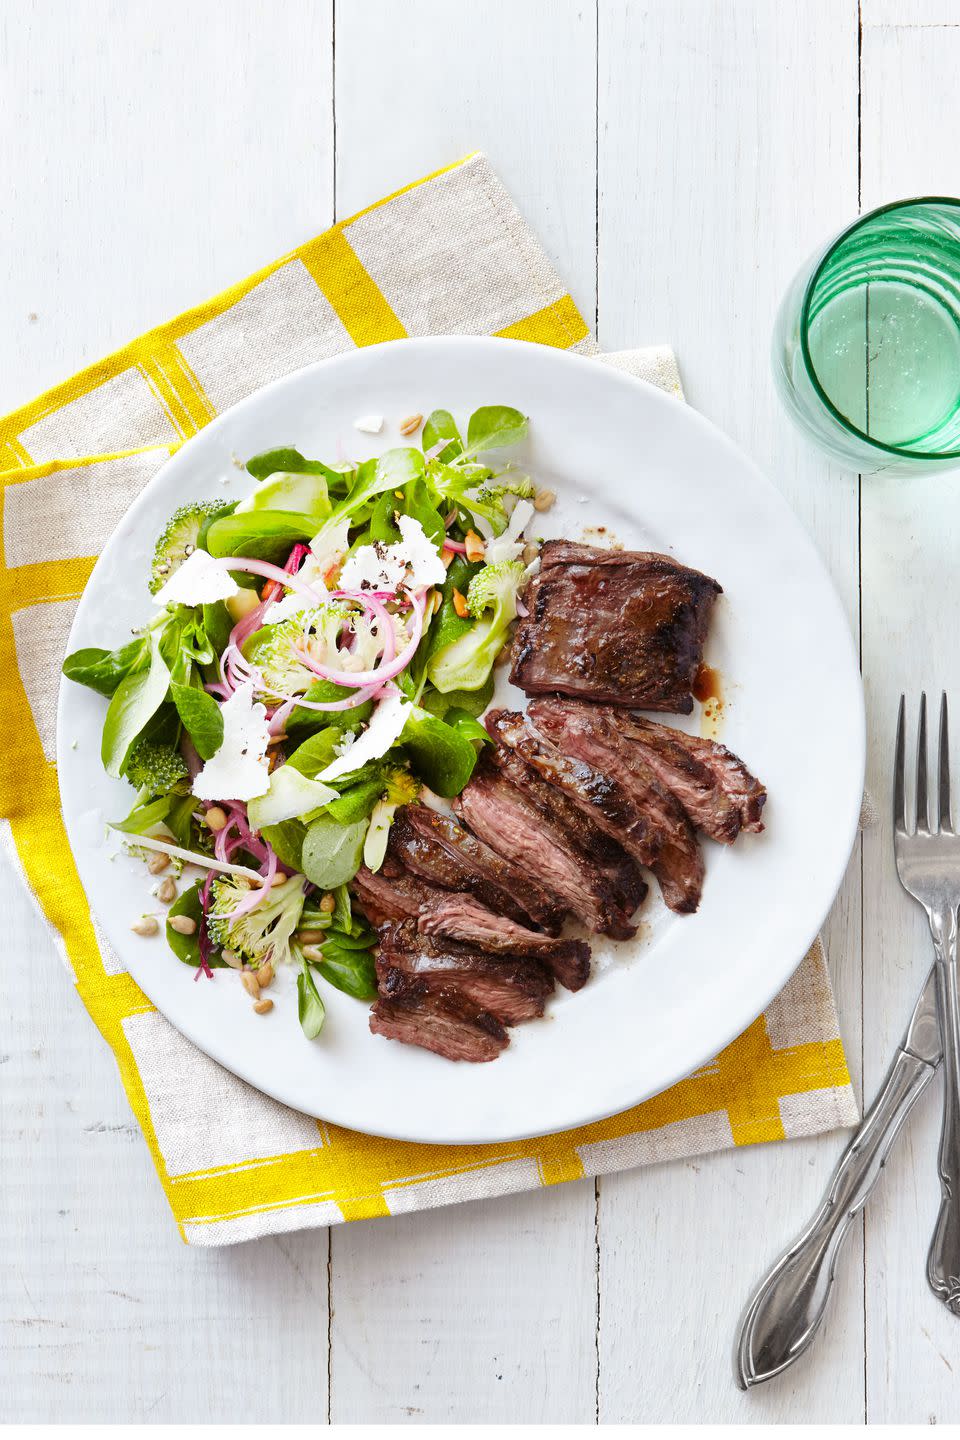 Spiced Skirt Steaks with Raw Broccoli and Mâche Salad